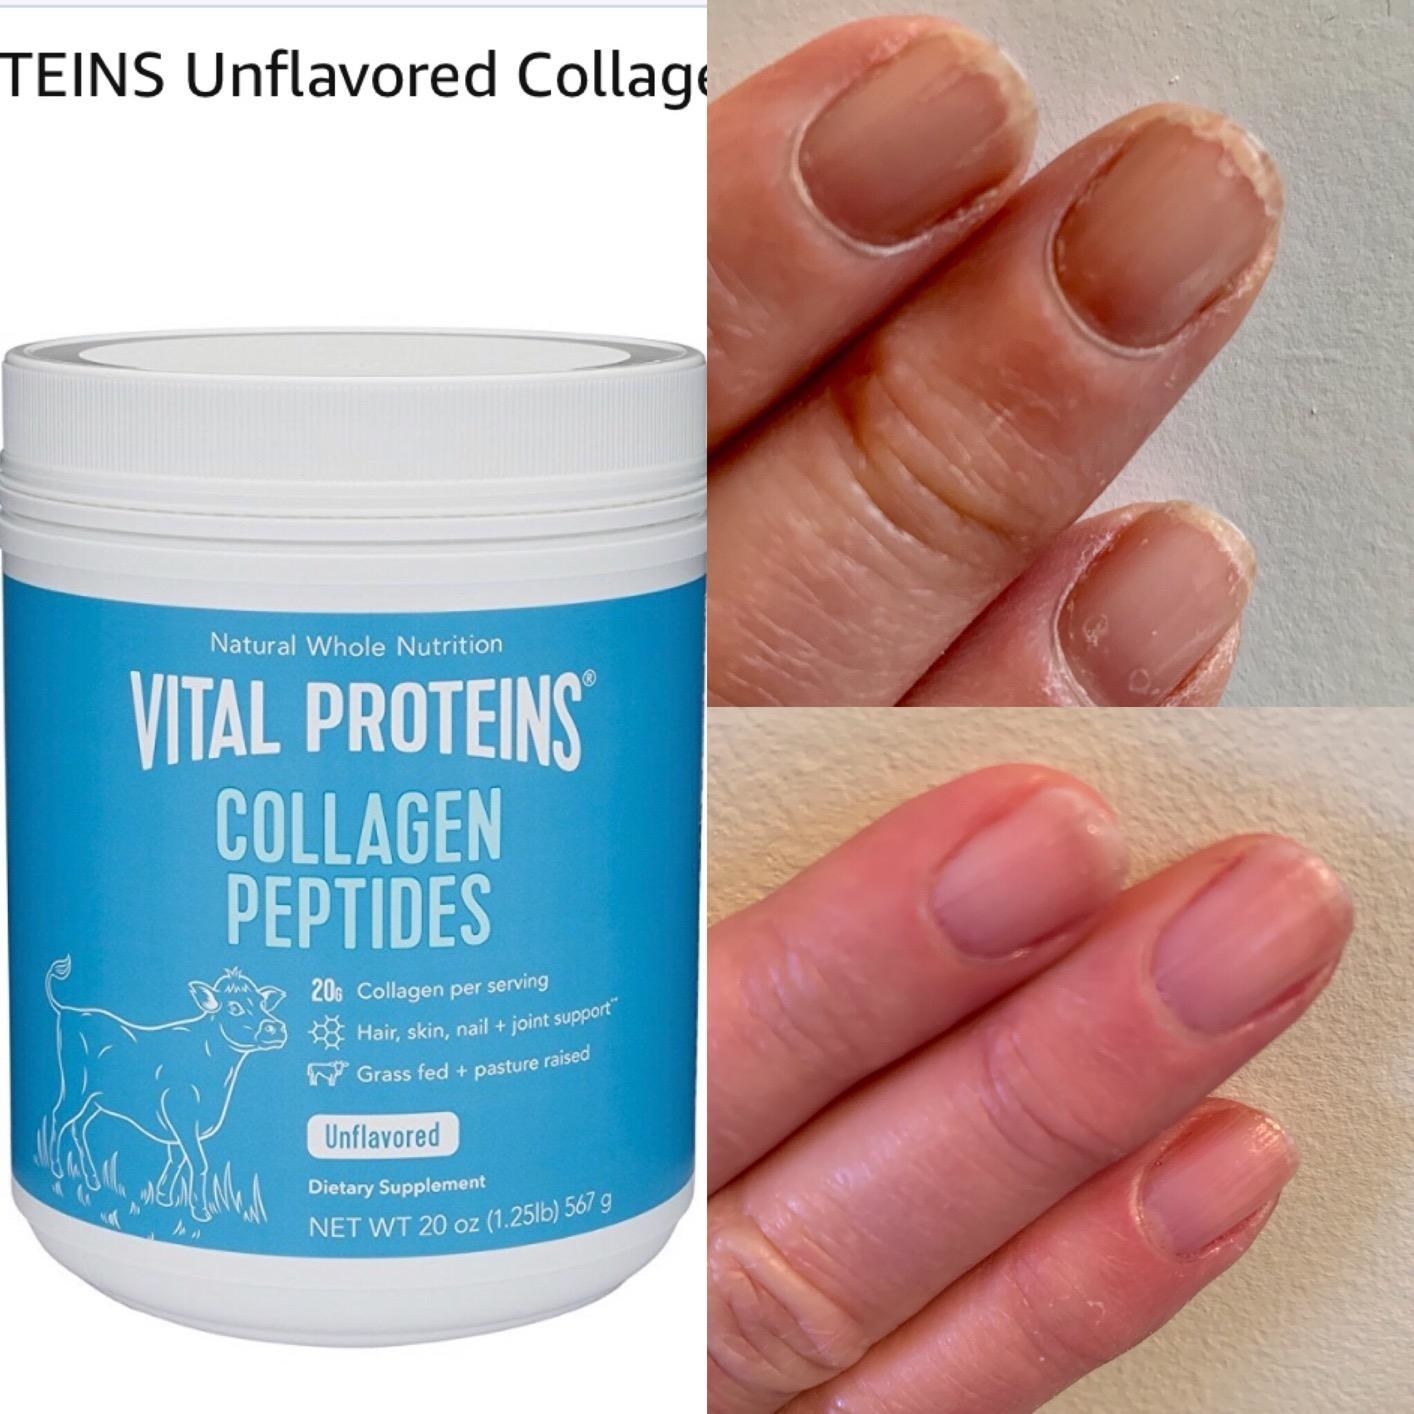 reviewer image of the collagen peptides and a before picture of cracked fingernails and an after photo of healthy nails